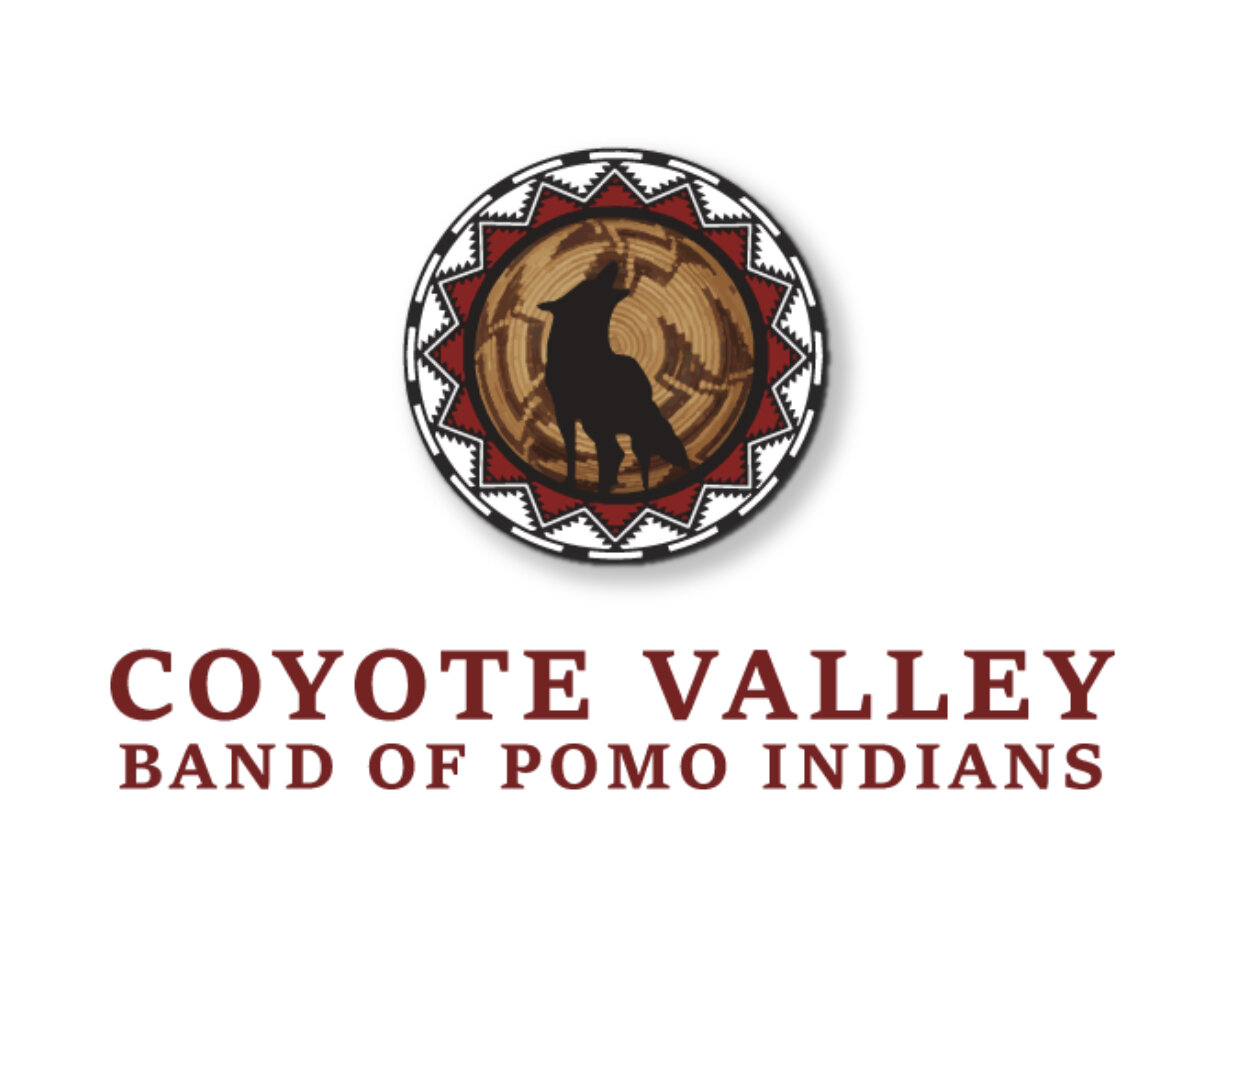 Coyote Valley Band of Pomo Indians.jpeg